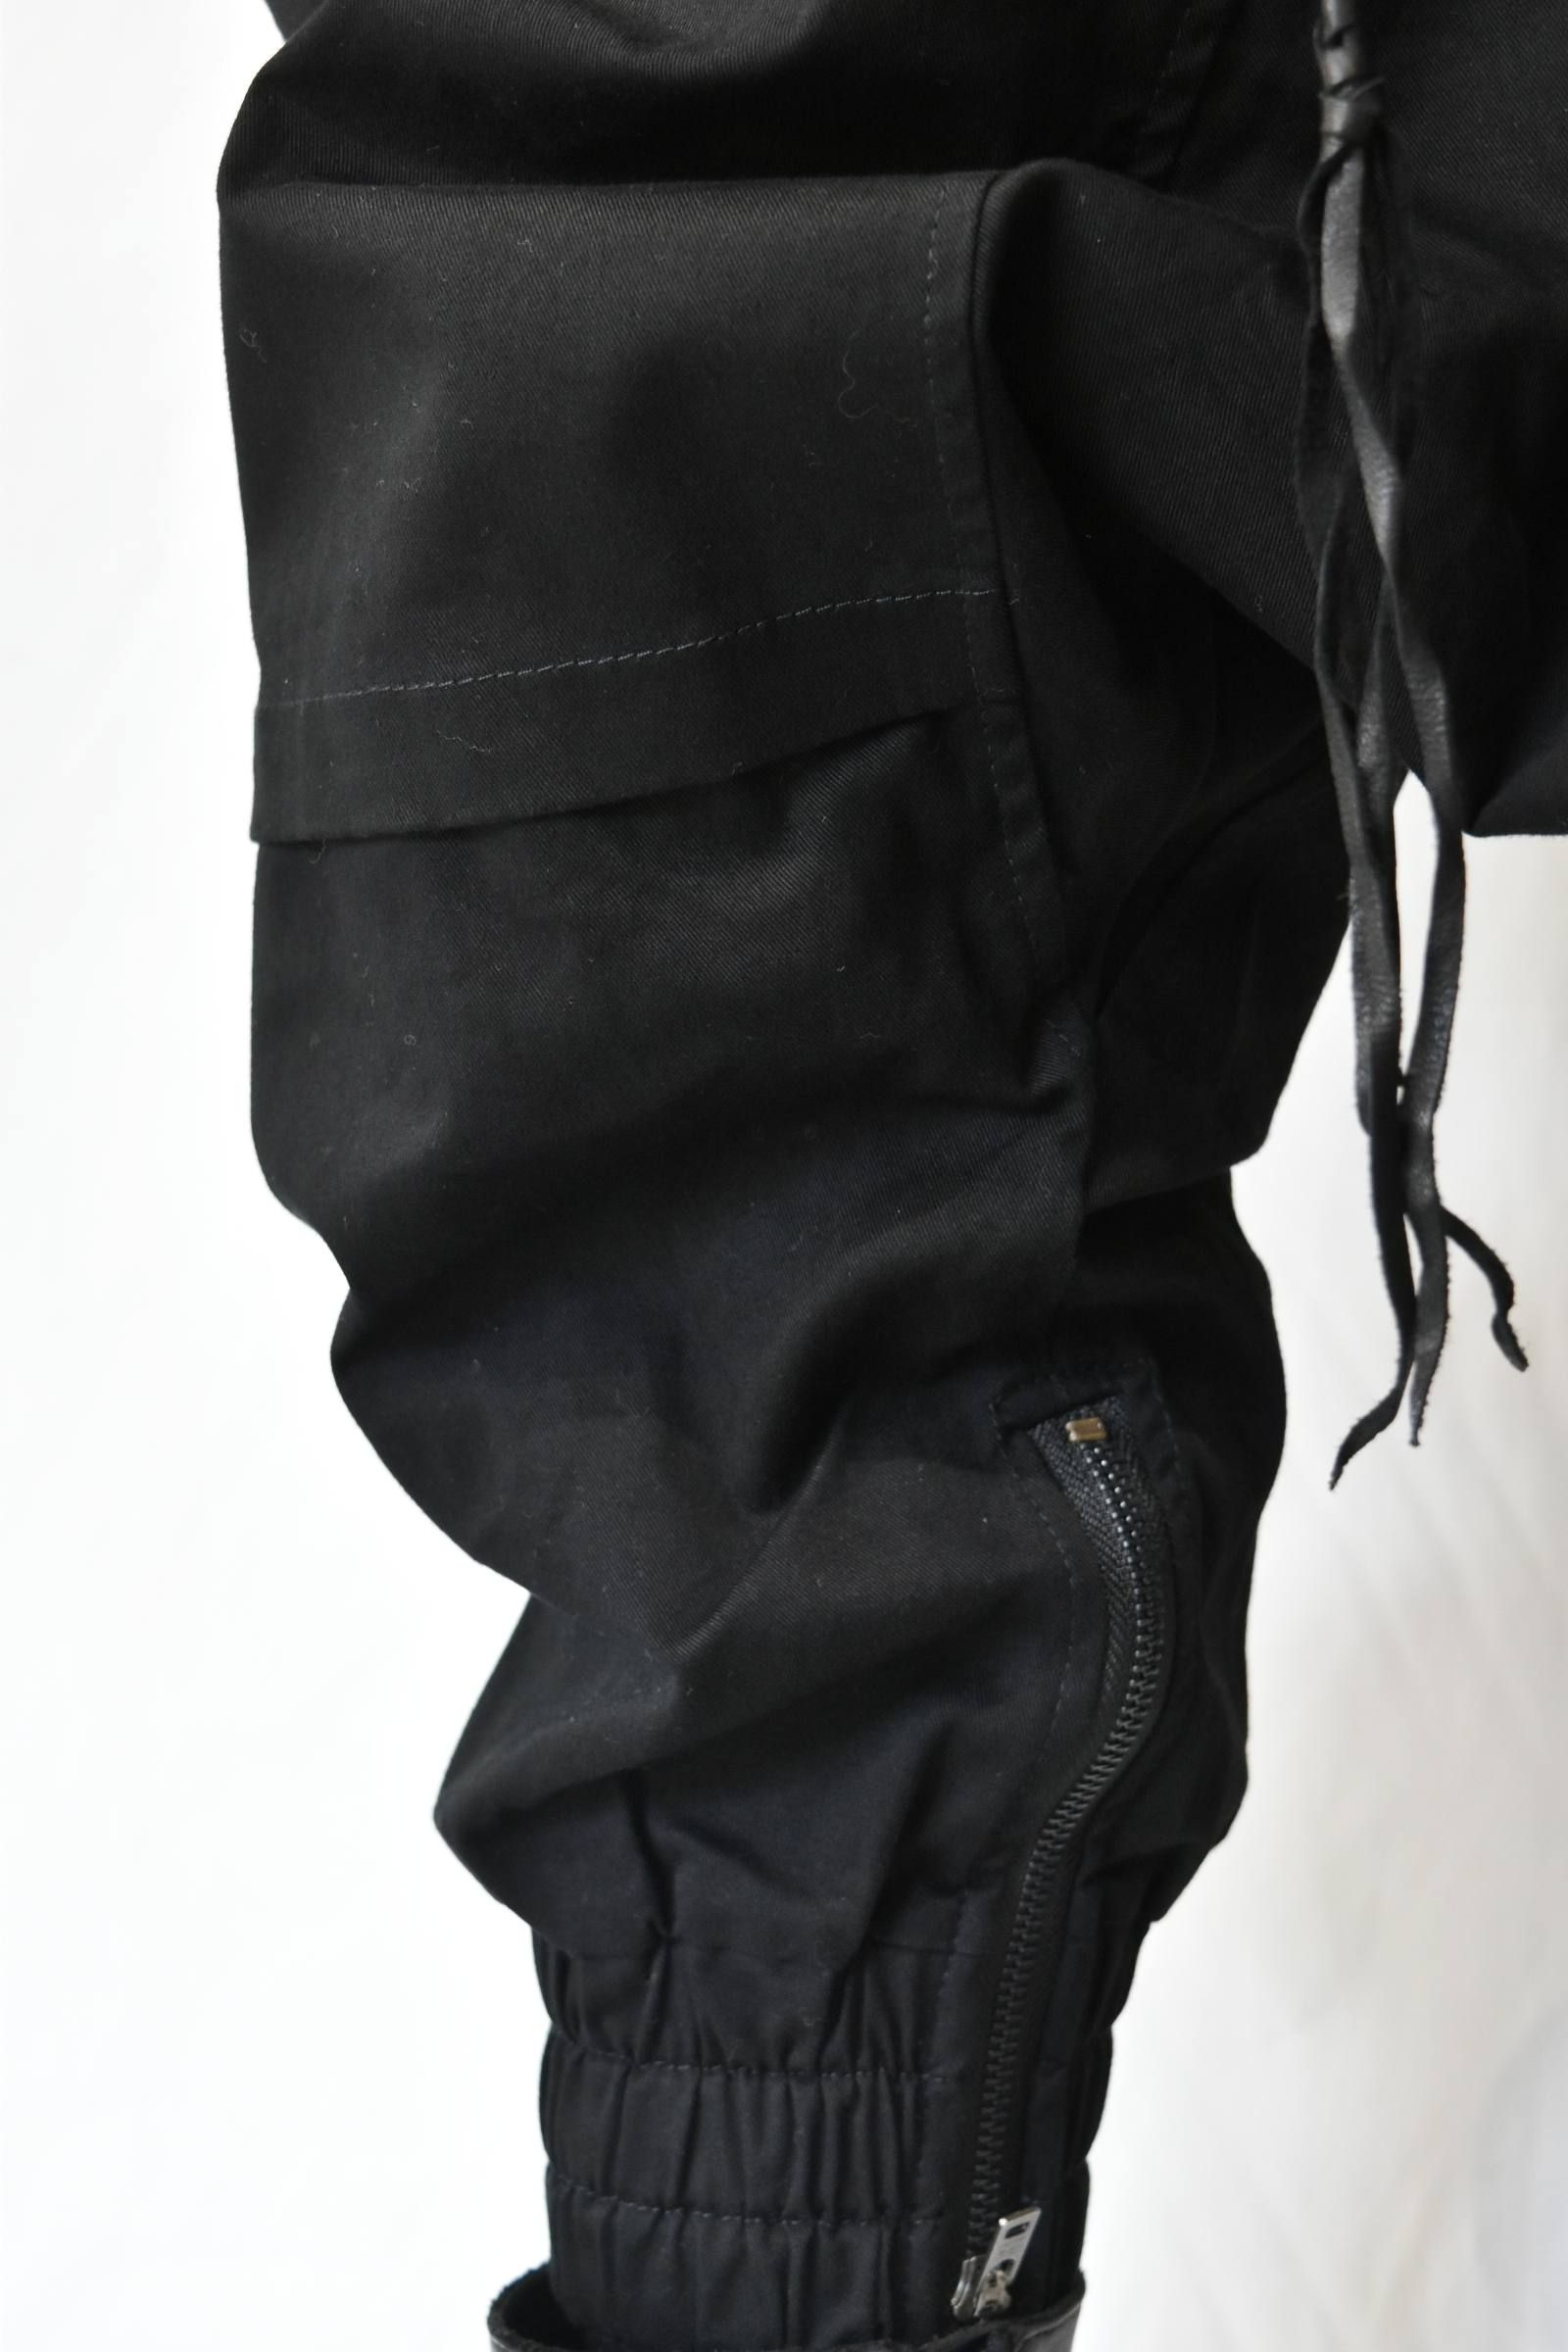 KMRii - Stretch Twill Triangle Pants | chord online store